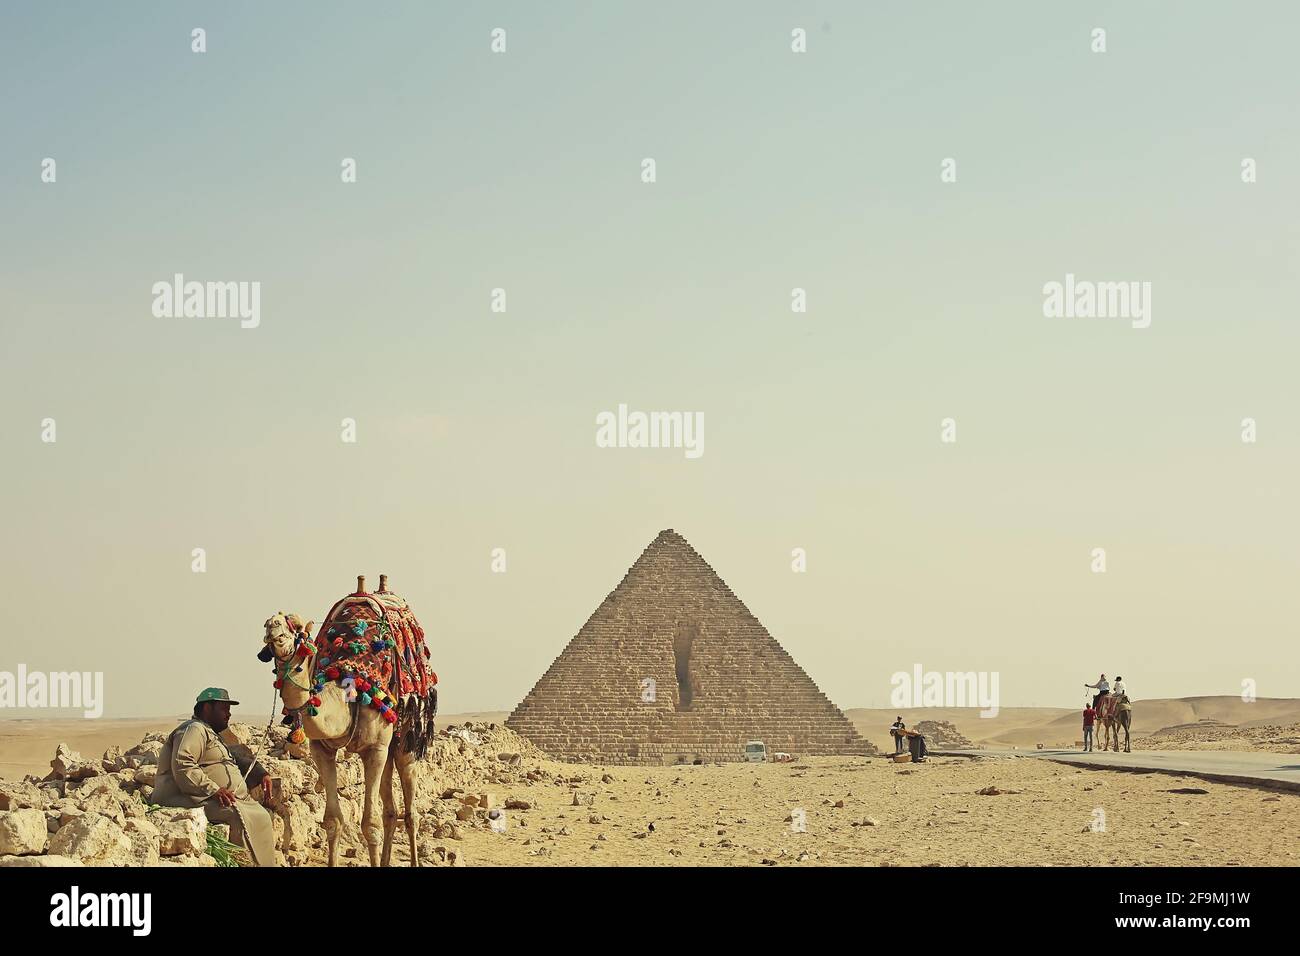 Egyptian desert landscape with pyramid, camels and men, Giza, Cairo Stock Photo